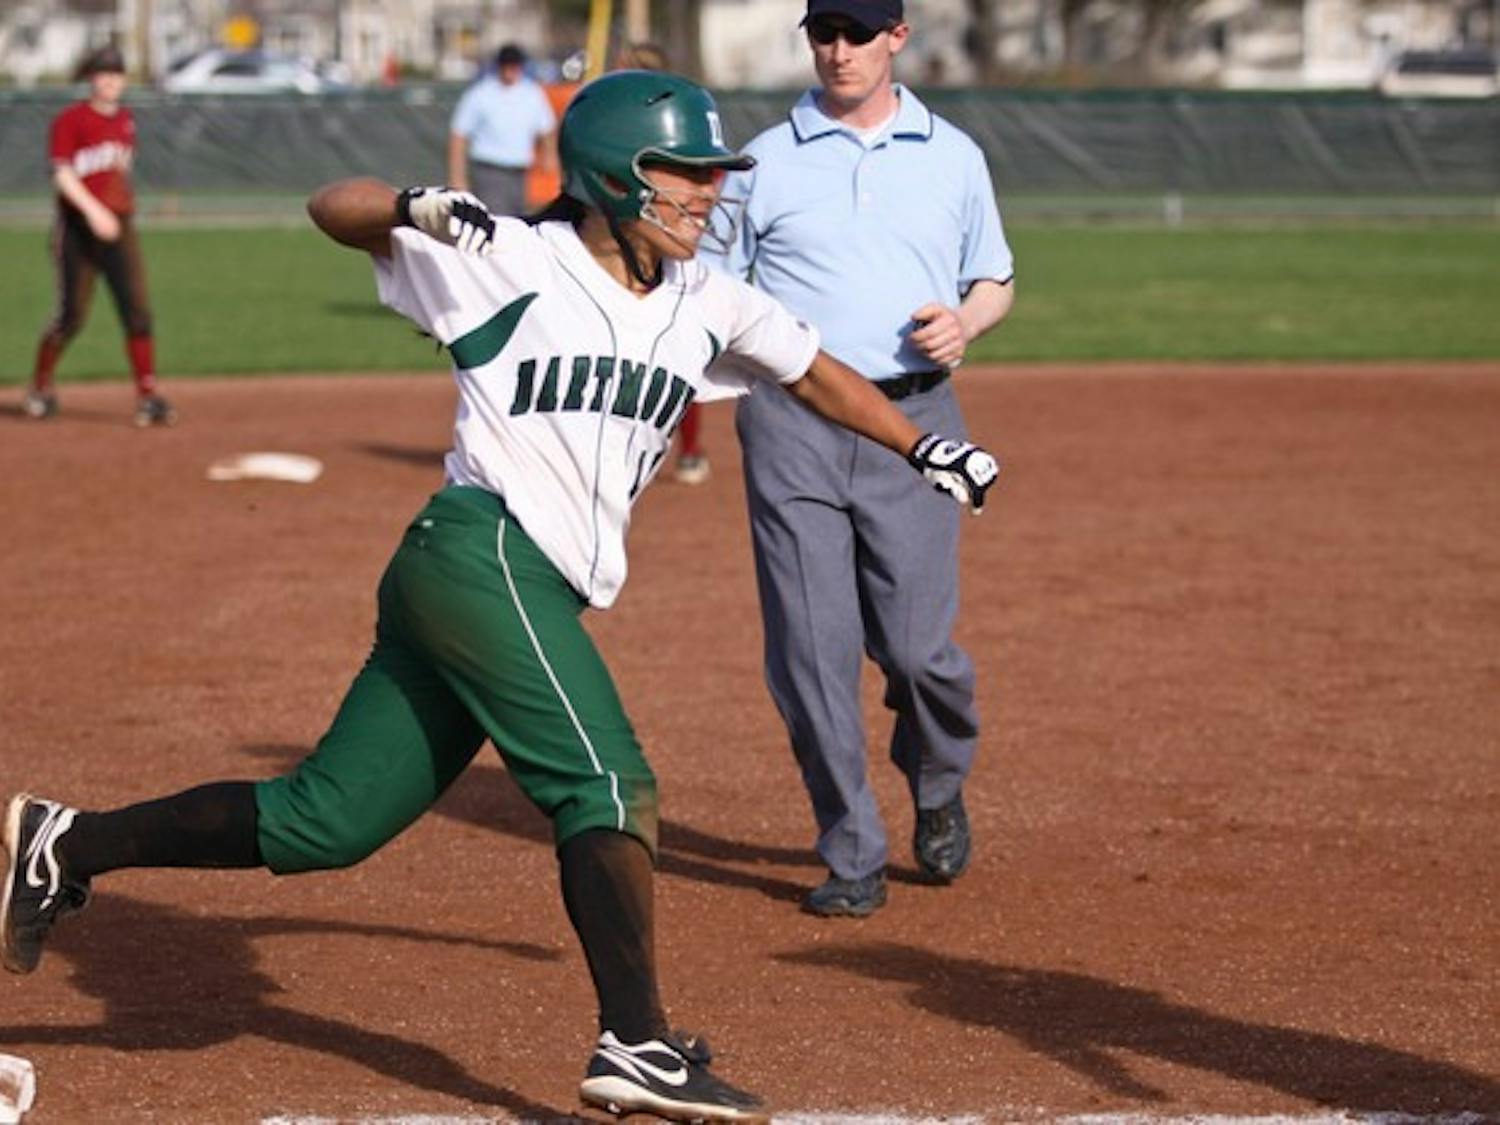 The Dartmouth softball team won two in a row Sunday to put them one game ahead of Harvard in the North Division, clinching the division title.